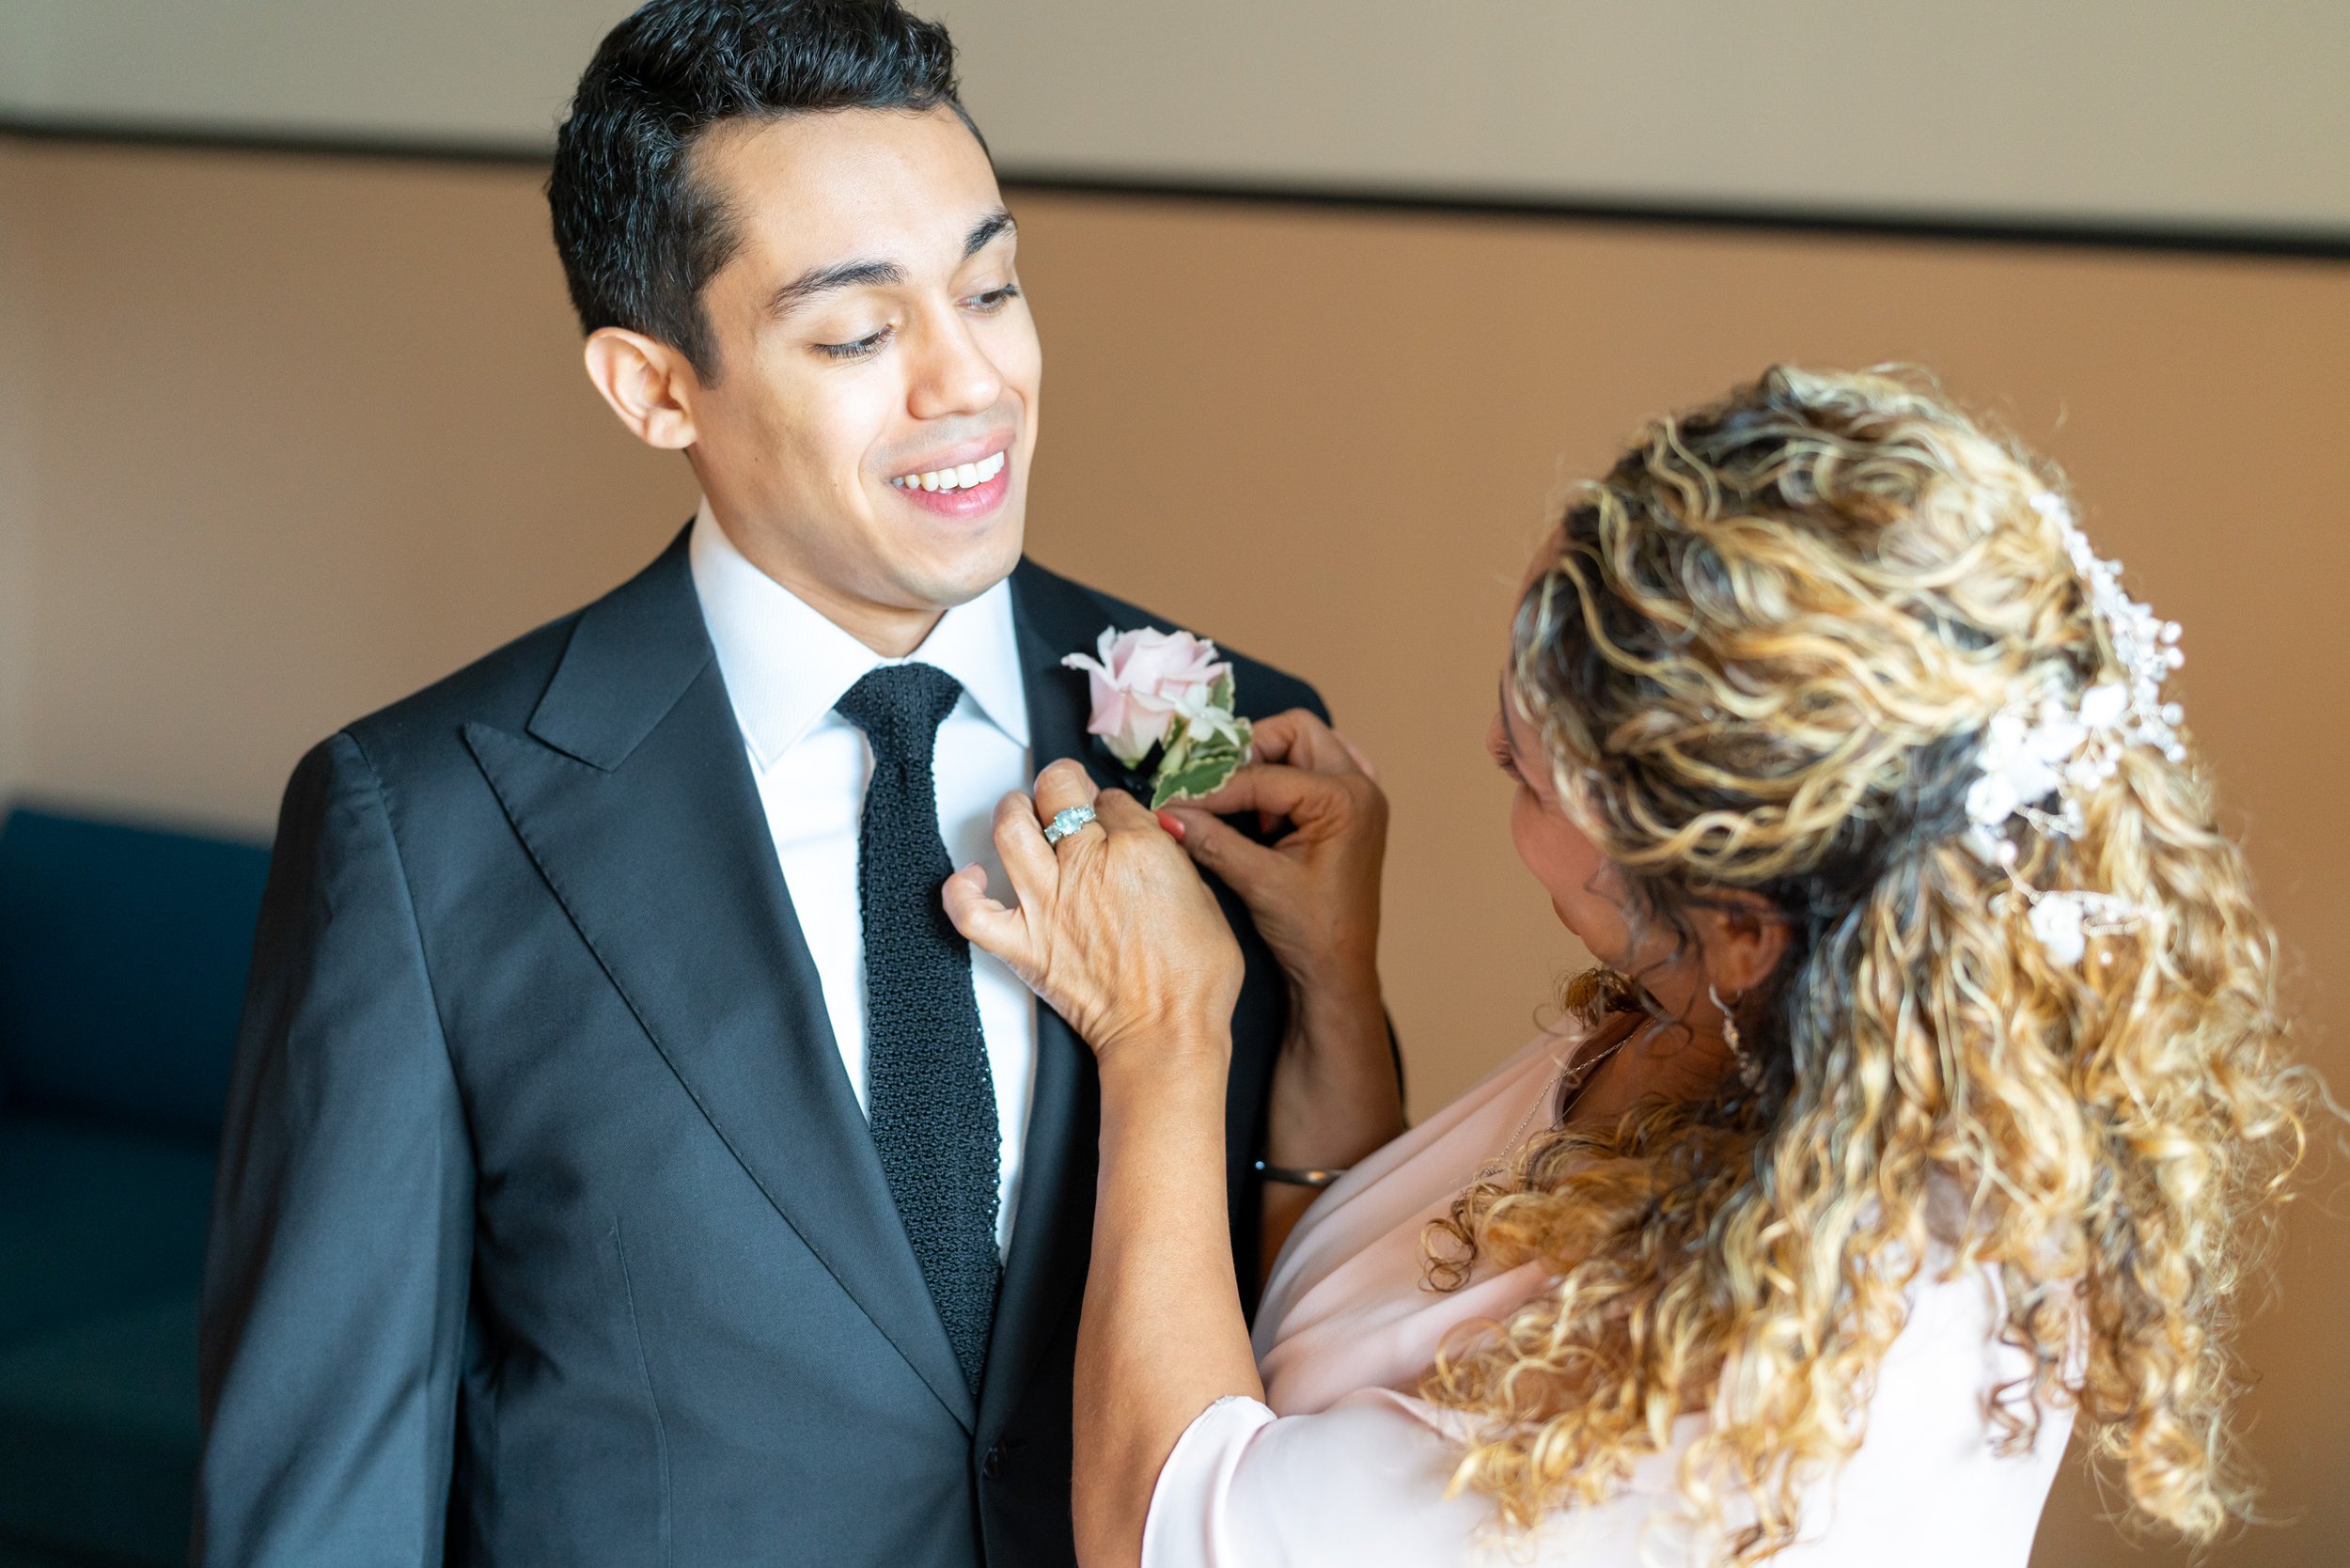 Grooms mom pinning boutonniere on her son at fun wedding